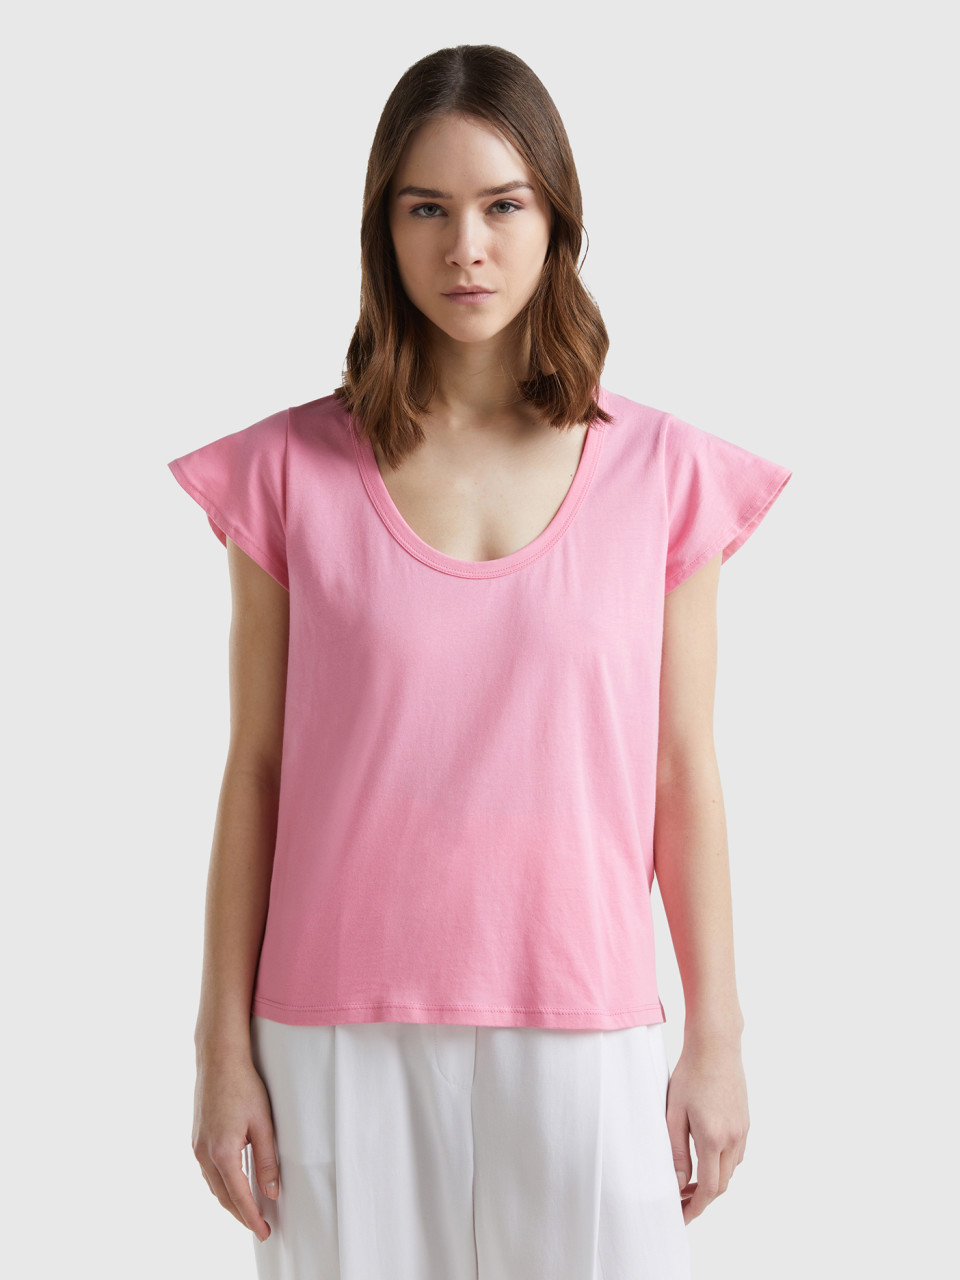 Benetton, T-shirt With Wide Neck, Pink, Women